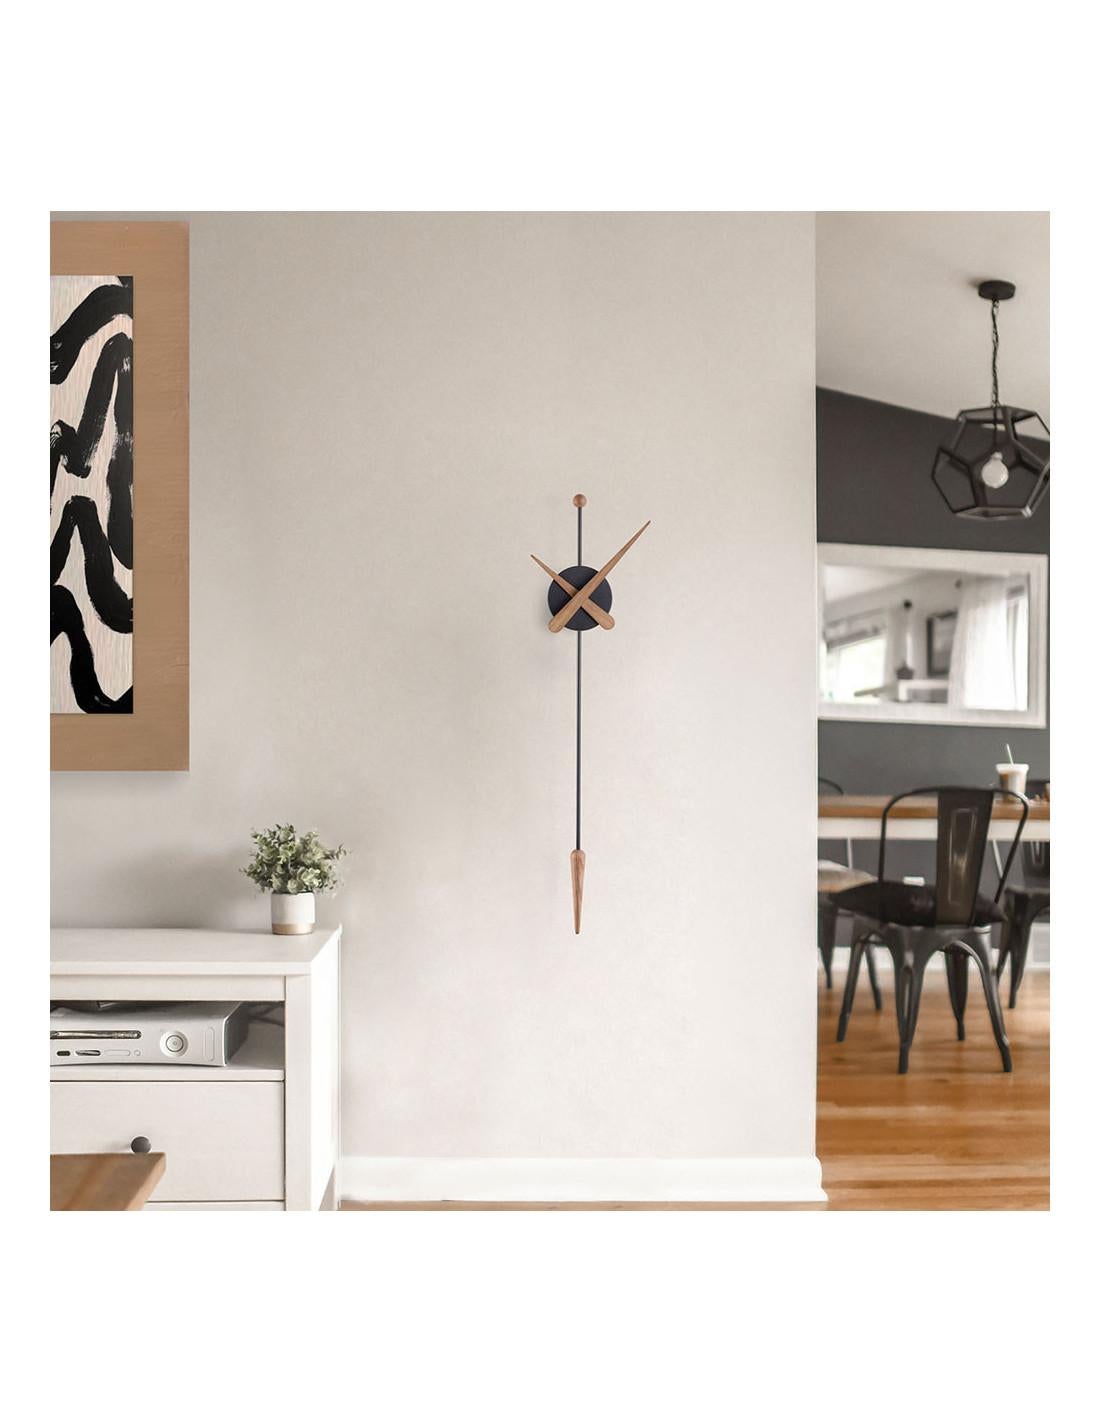 A modern wall clock with an avant-garde design and a lot of character, reinterpreting the traditional pendulum clock.
Each clock is a unique handmade piece.
Material: Wood and Fiberglass. 
Warranty: Limited 2 Year.
California Residents: Prop 65